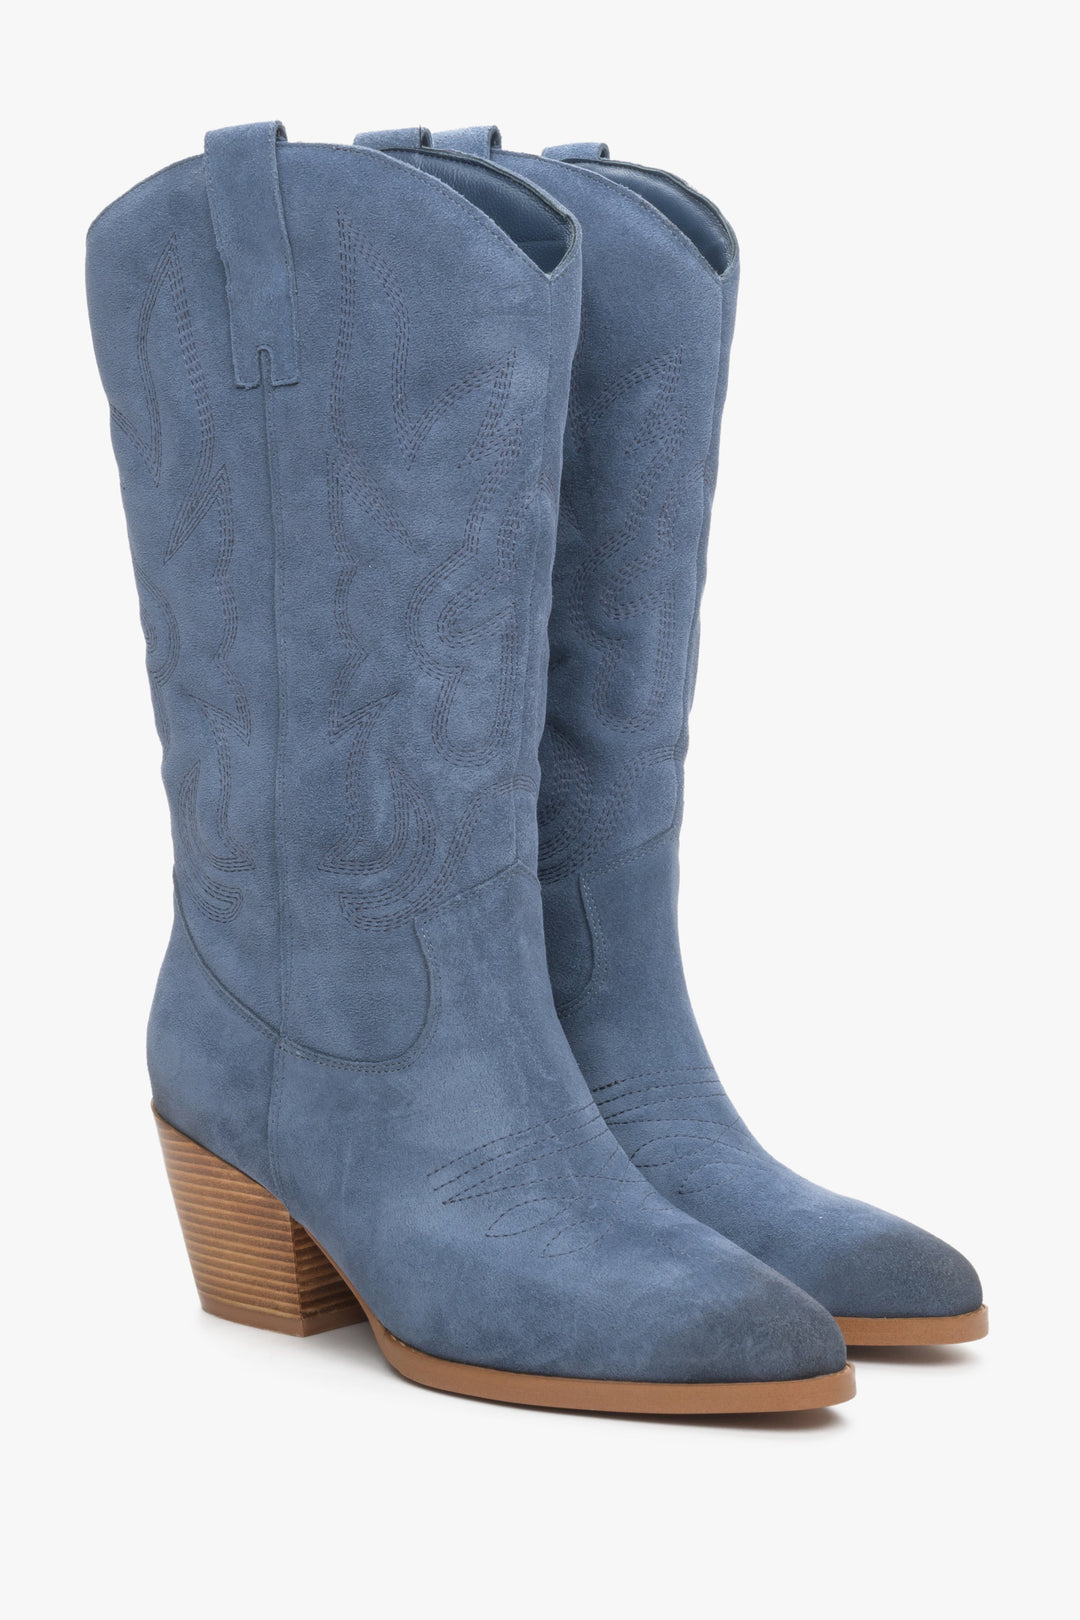 Women's high blue cowboy boots made of genuine velour by Estro.